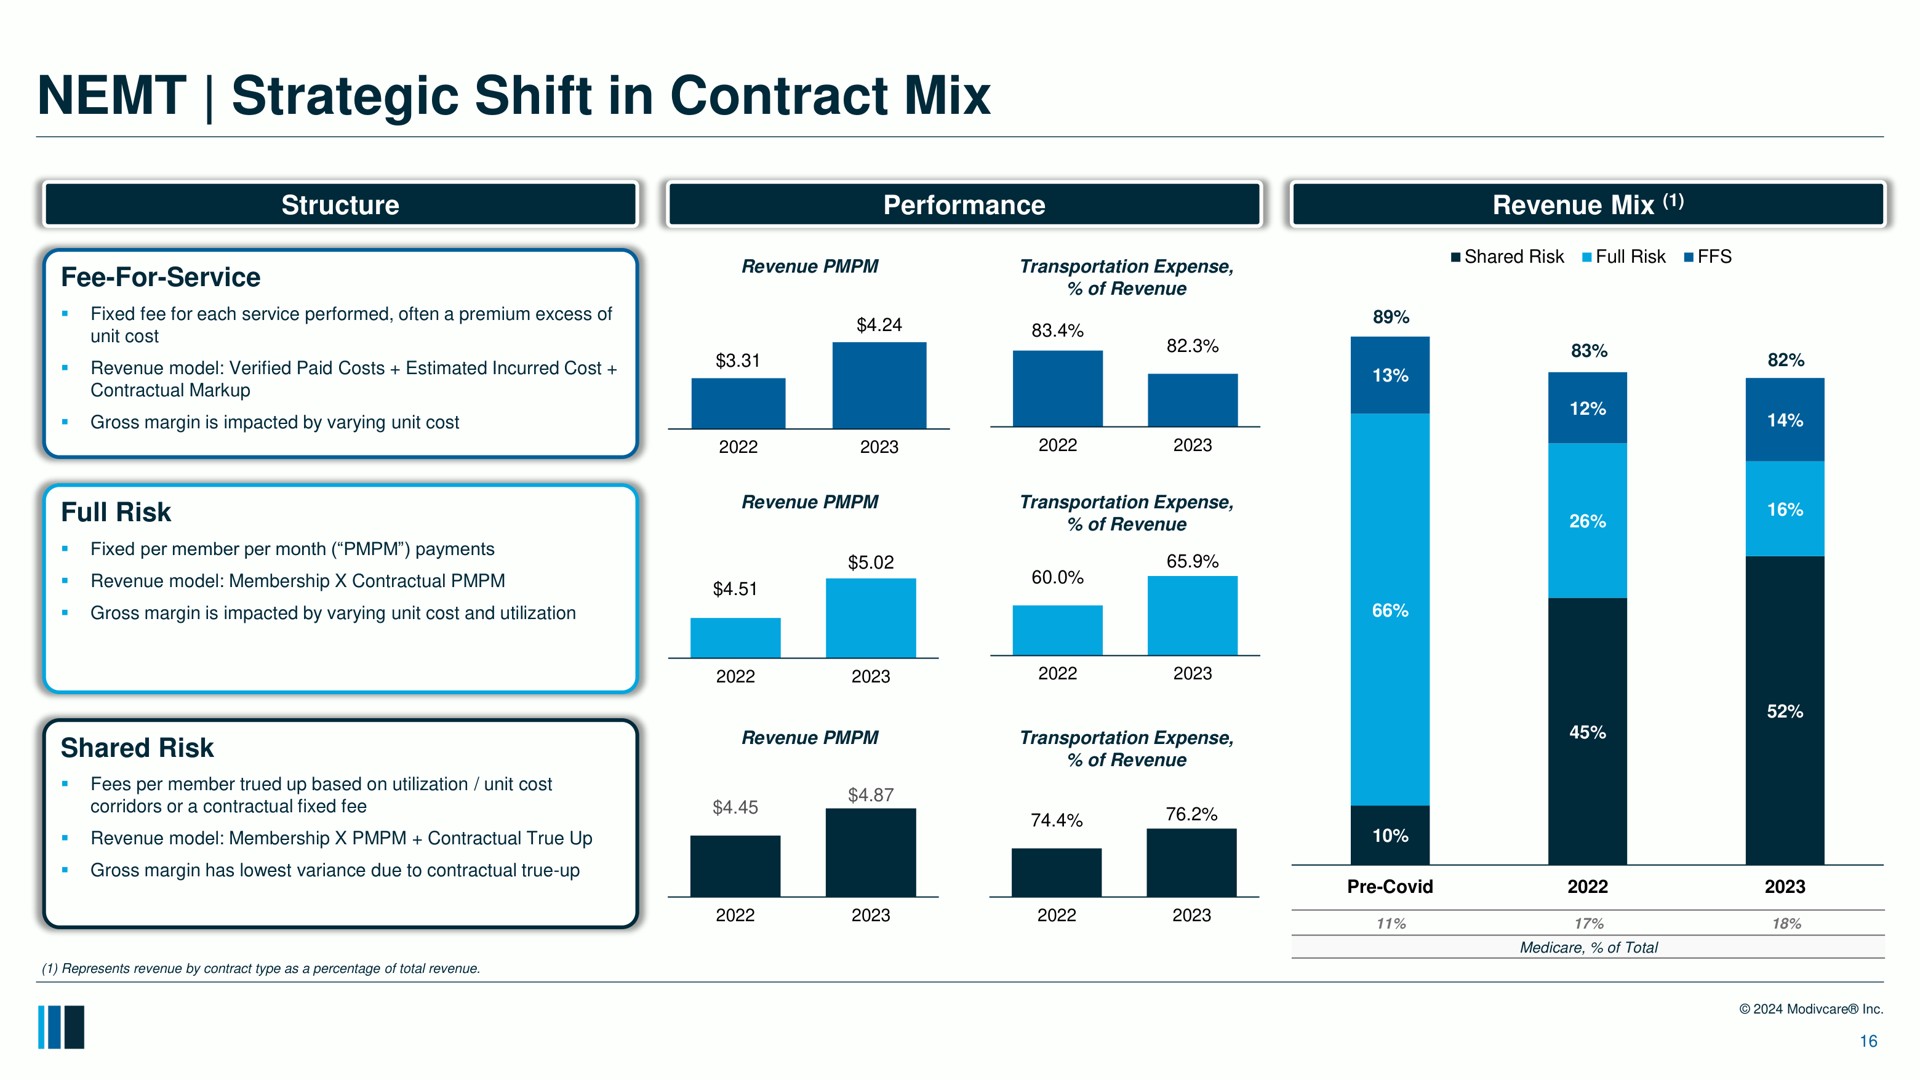 strategic shift in contract mix a fee for service deters | ModivCare